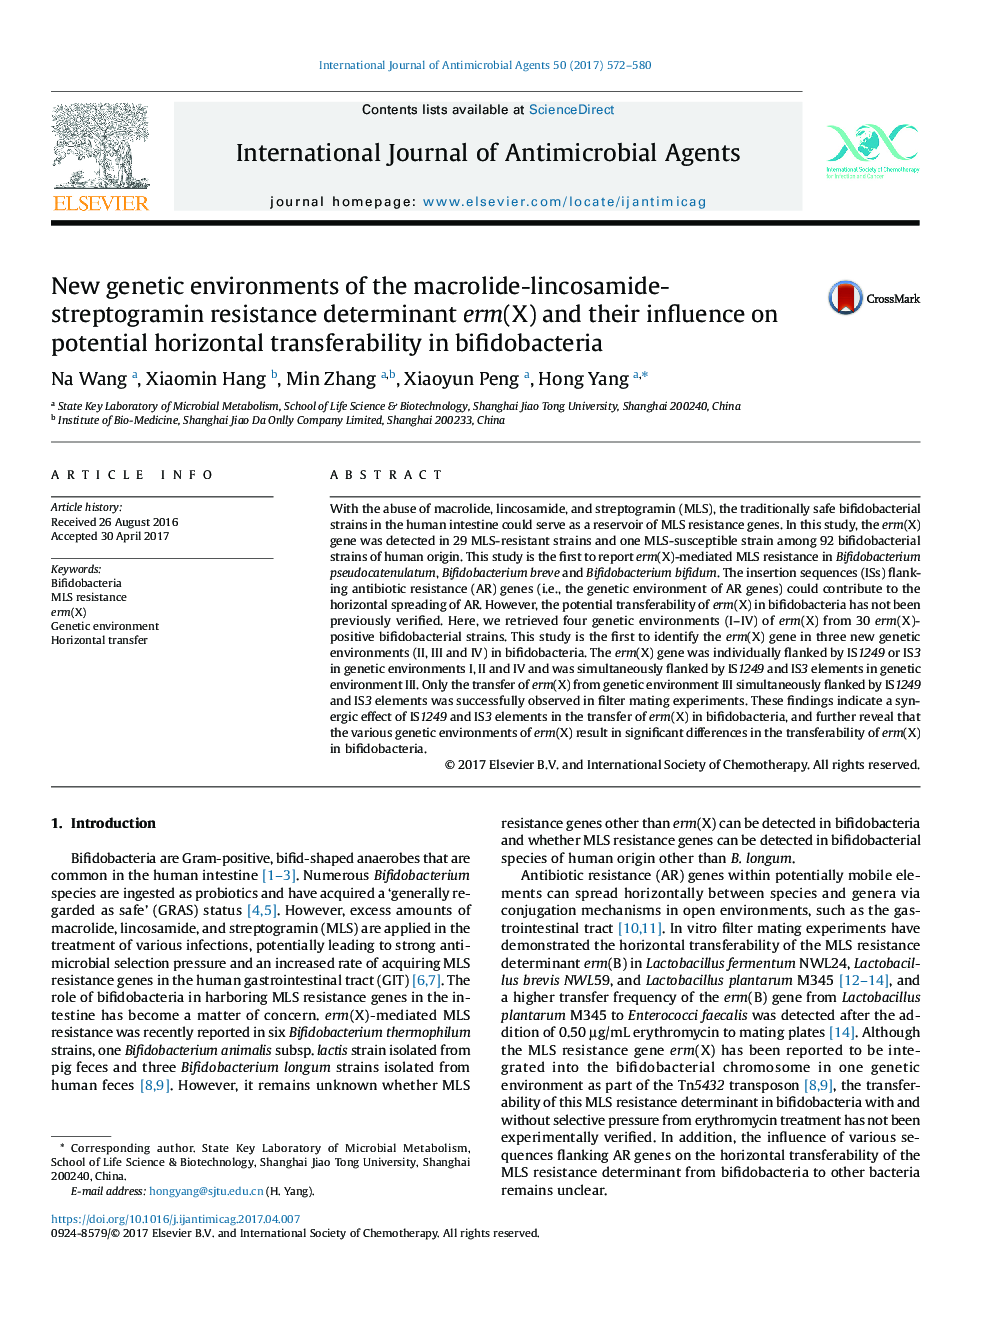 New genetic environments of the macrolide-lincosamide-streptogramin resistance determinant erm(X) and their influence on potential horizontal transferability in bifidobacteria